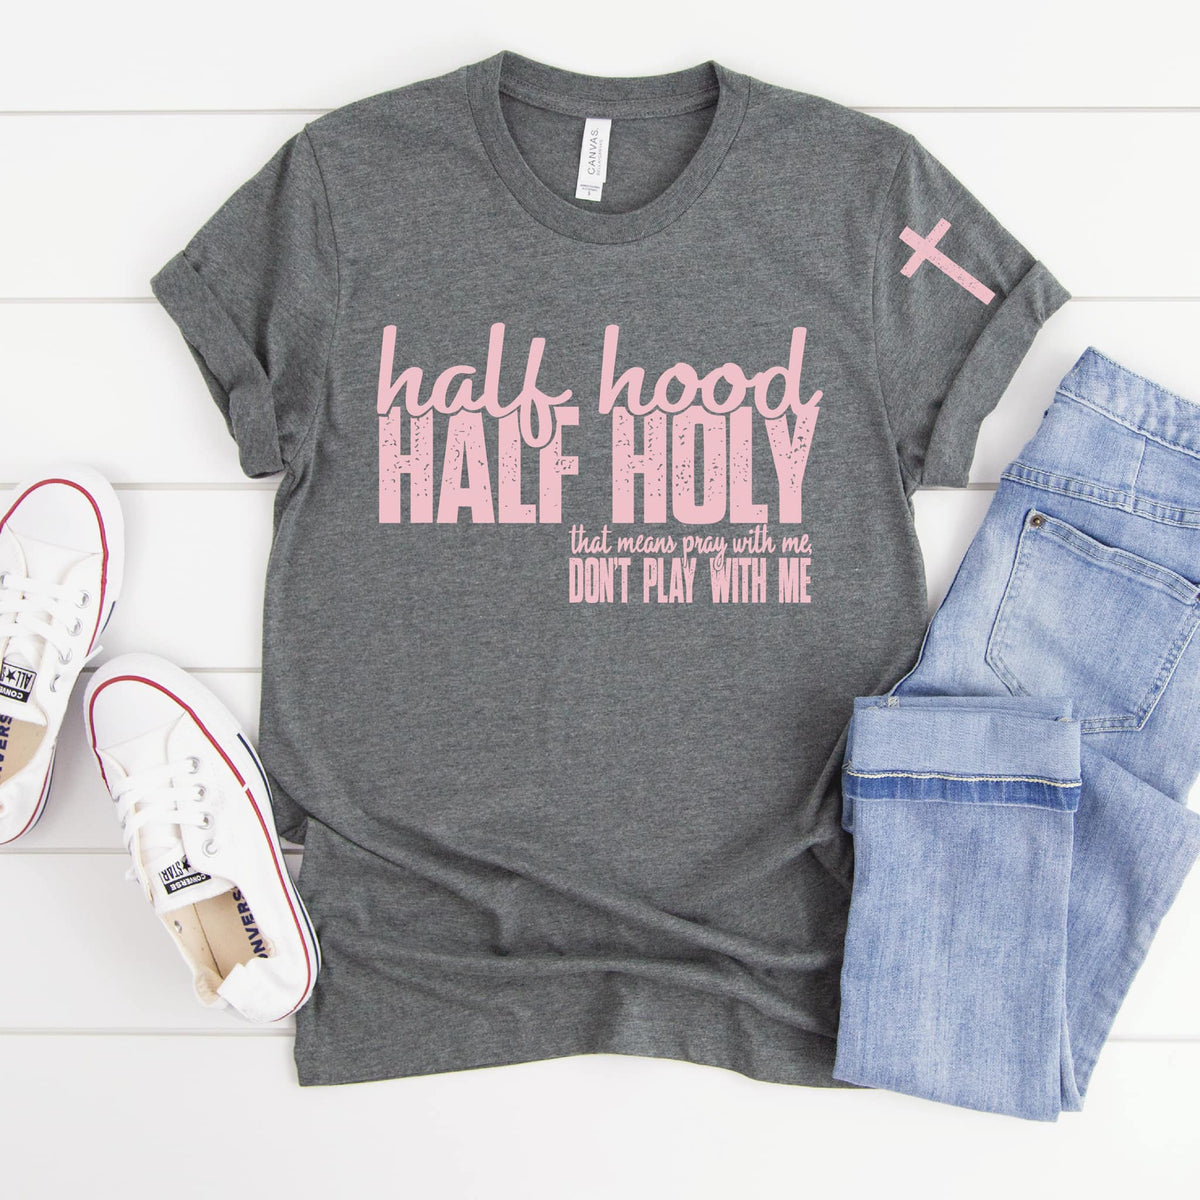 Half Hood Half Holy With Sleeve Accent Graphic Tee ALLOW 7 DAYS TO SHIP + SHIP TIME